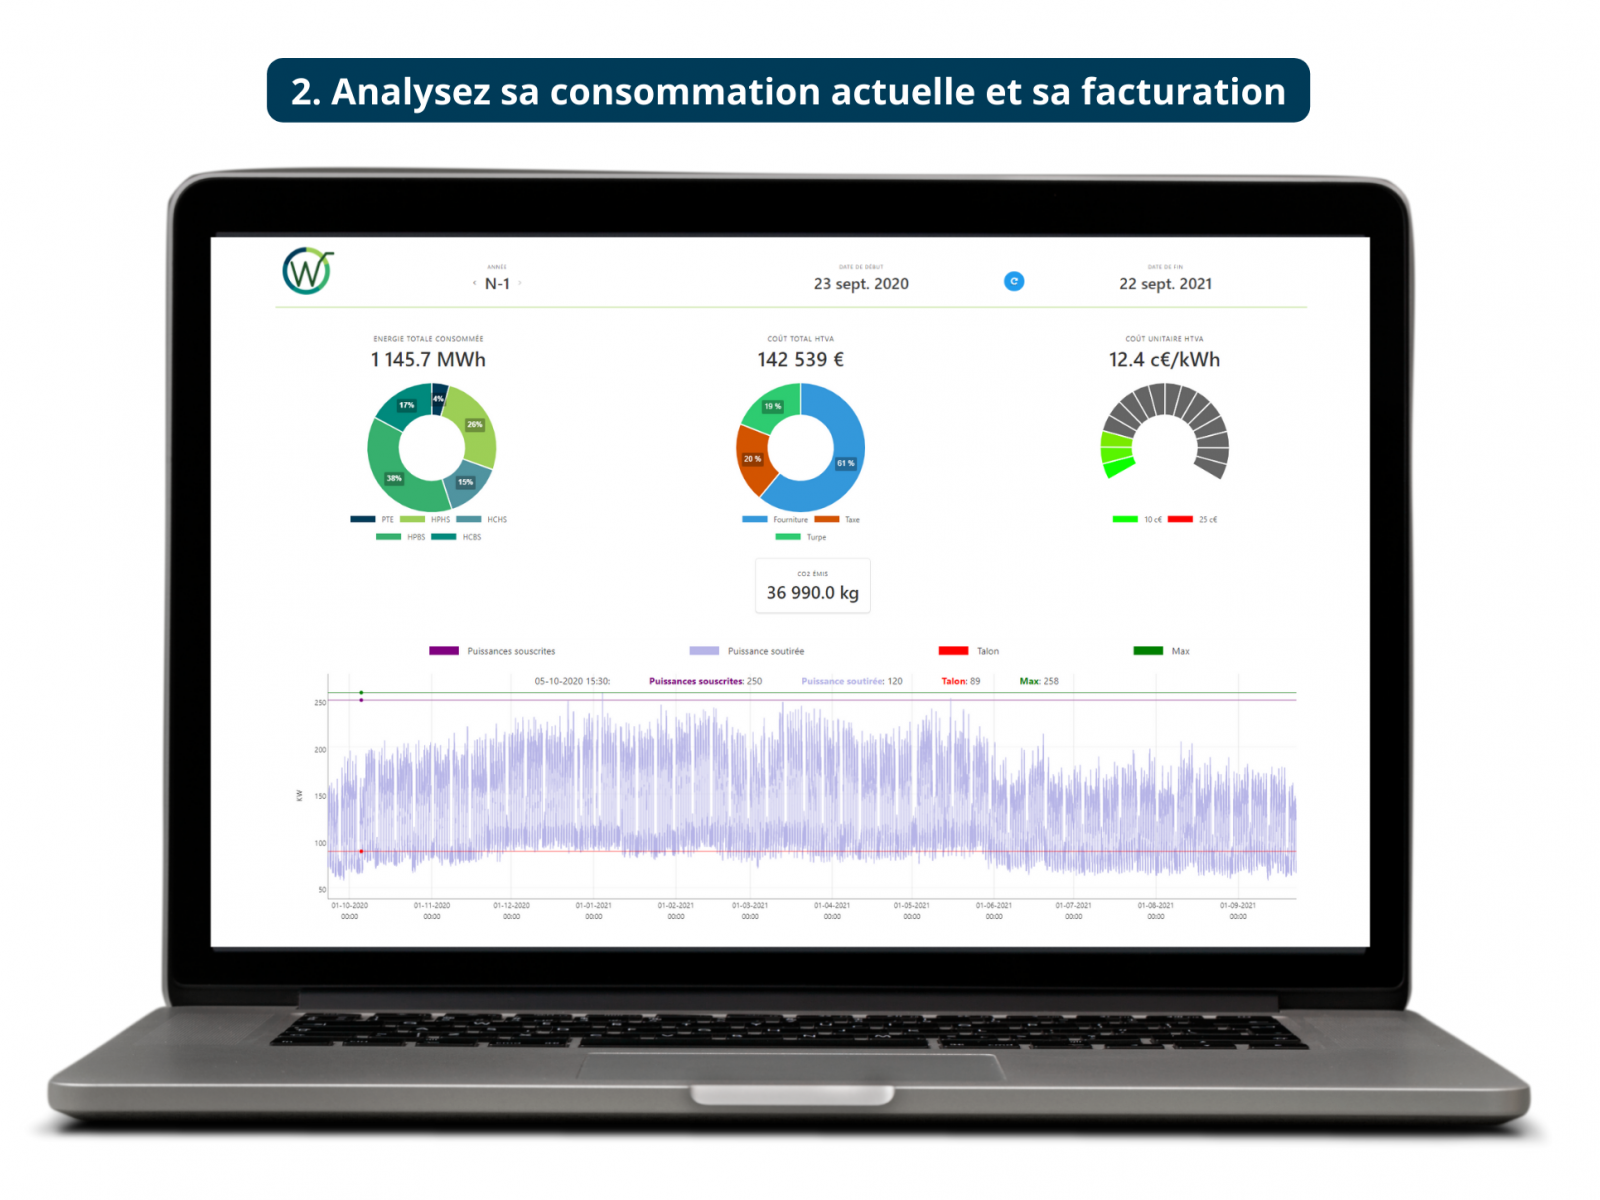 Analysez sa consommation actuelle et sa facturation